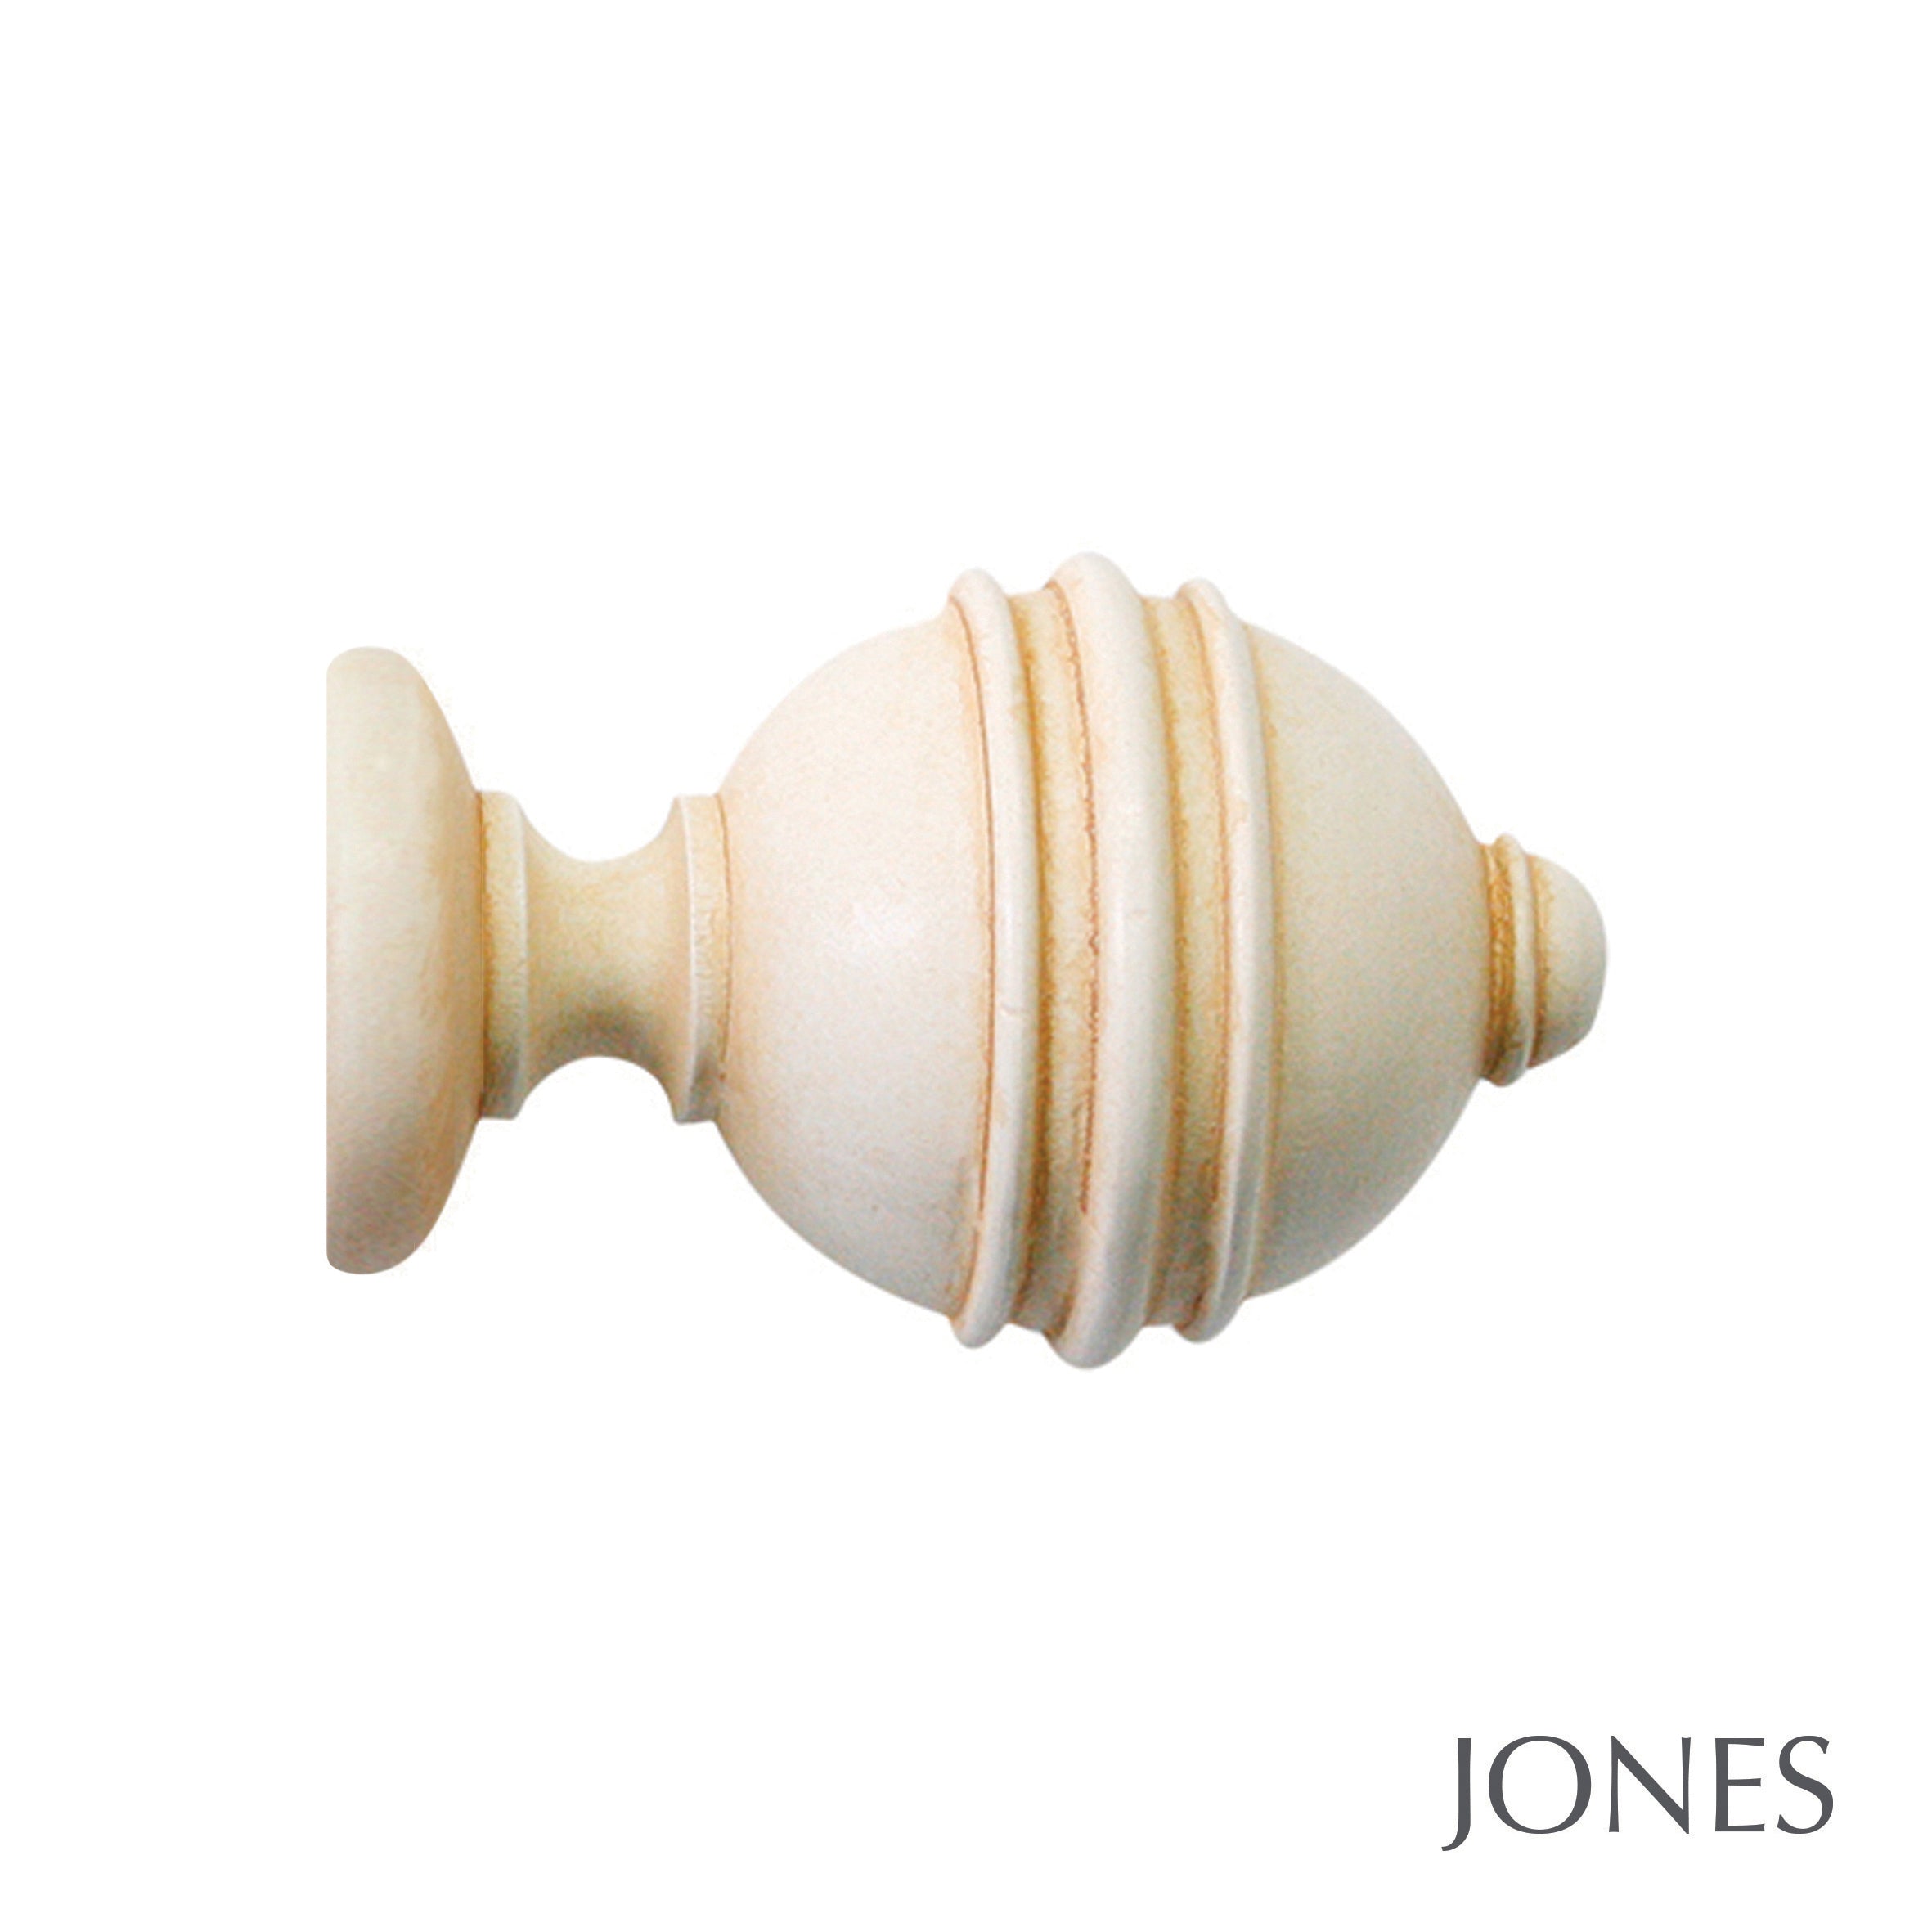 Jones Interiors Cathedral Ely Finial Curtain Pole Set in Ivory